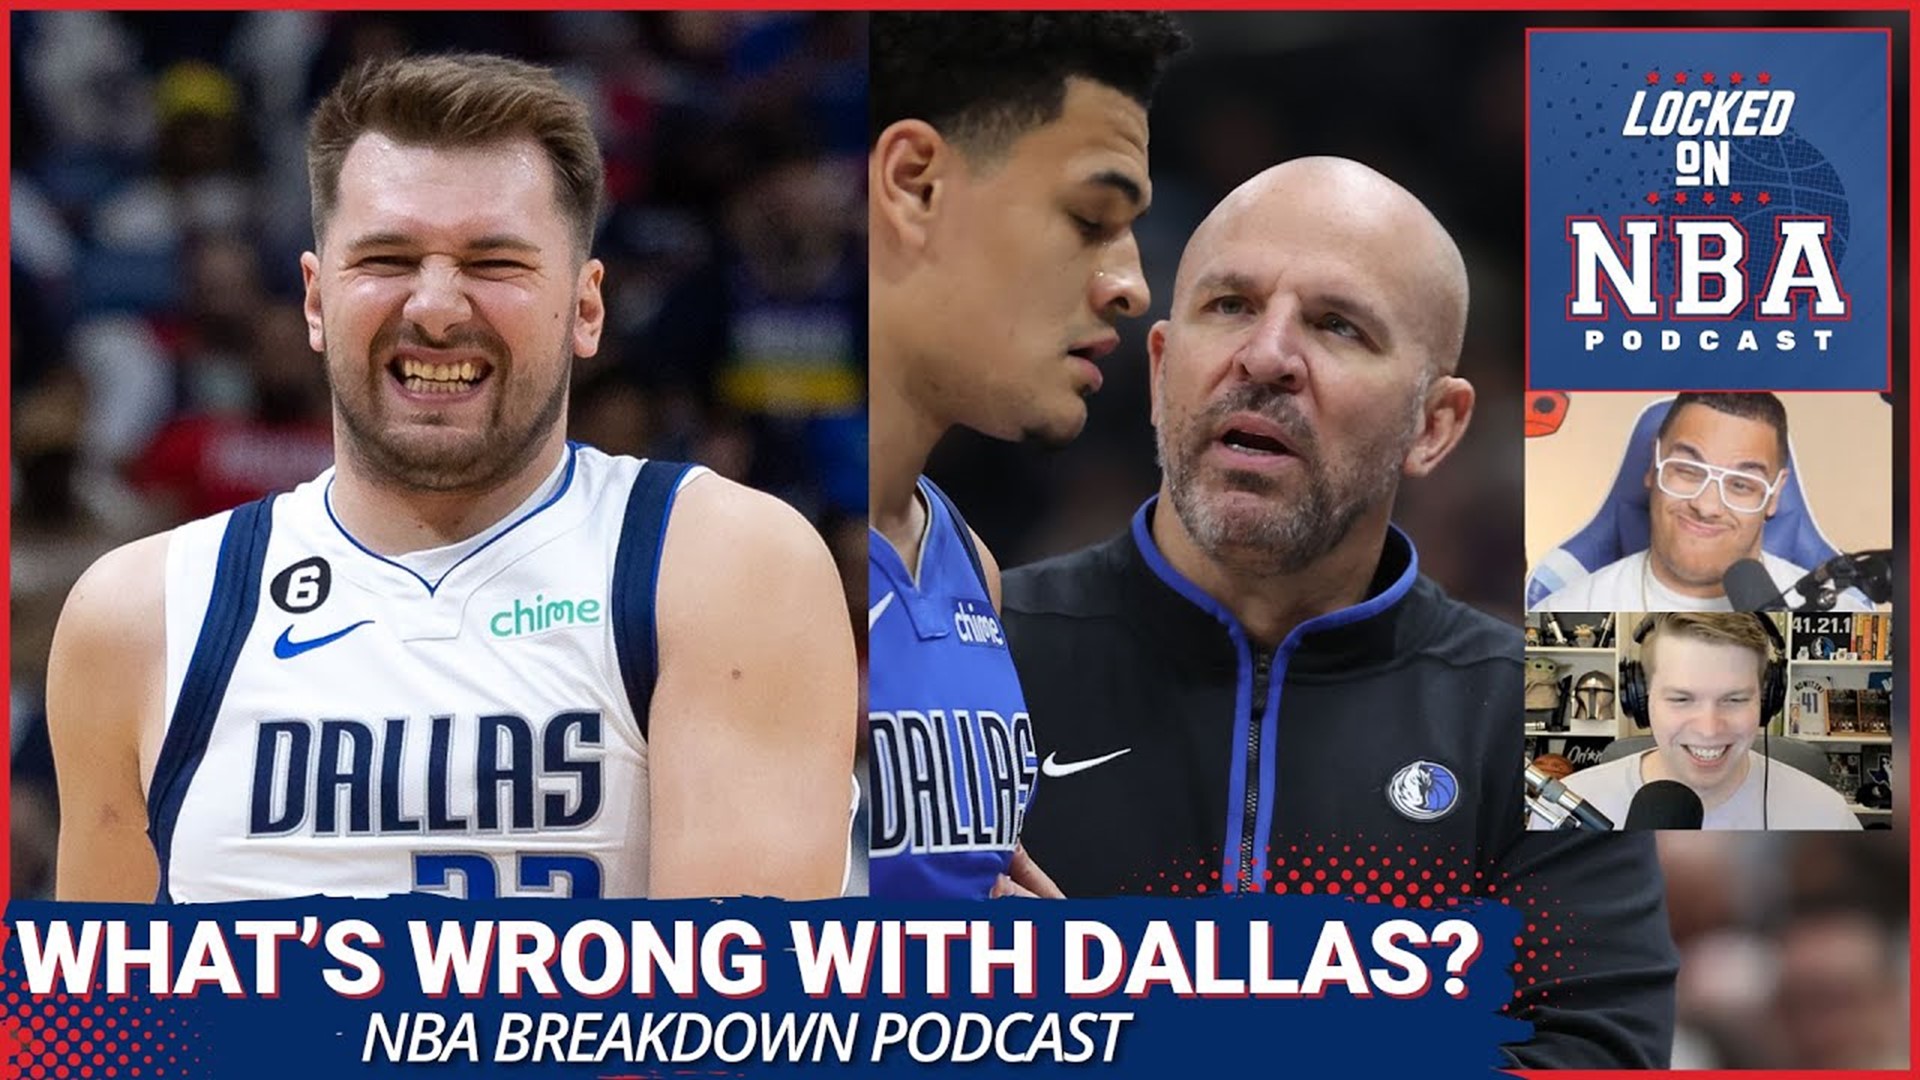 Luka Doncic Injured, What's Wrong With Dallas Mavericks? Which NBA Teams Have Most to Prove?